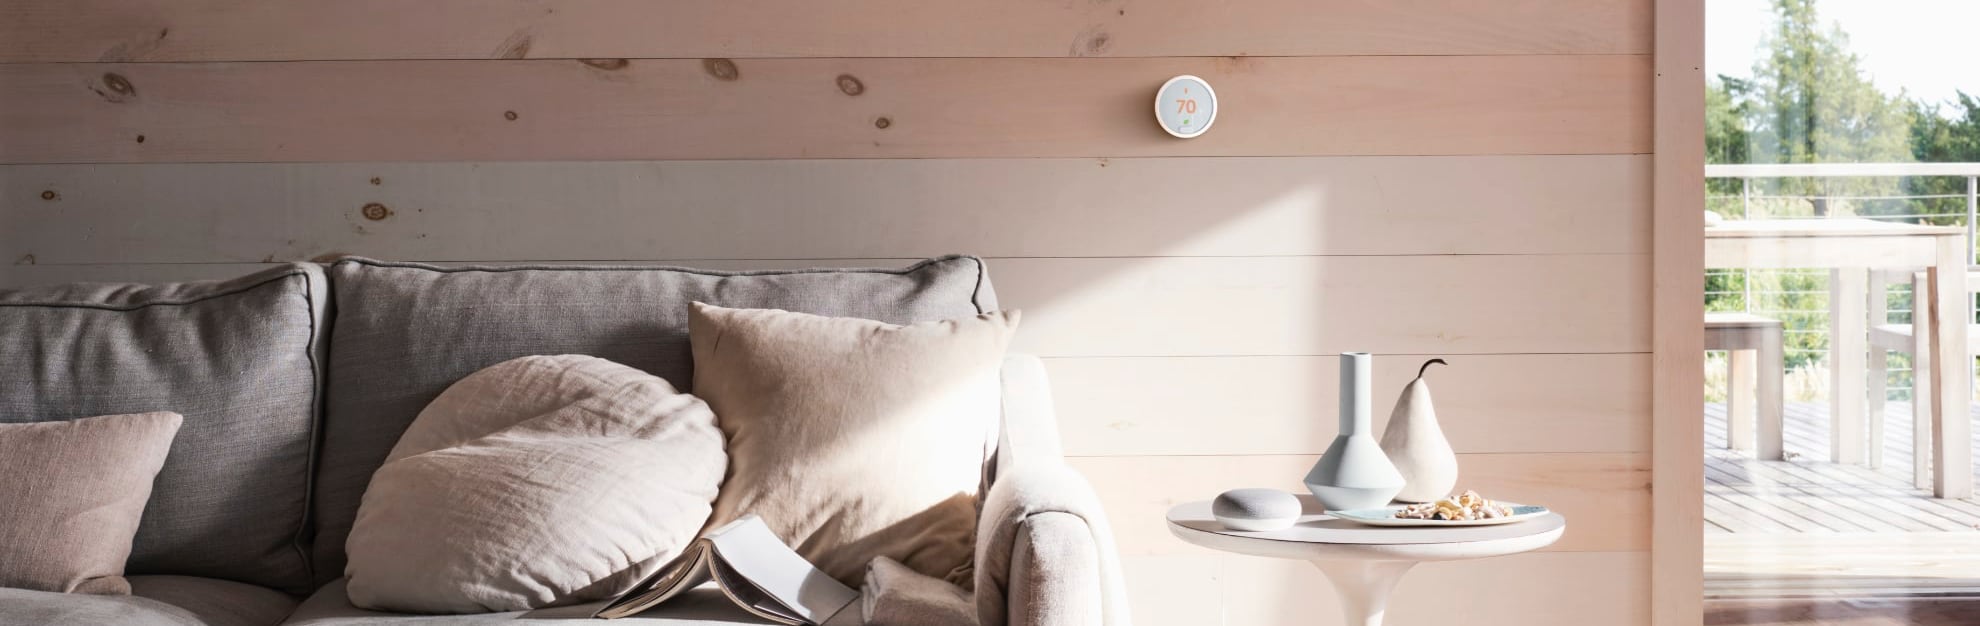 Vivint Home Automation in Fort Worth